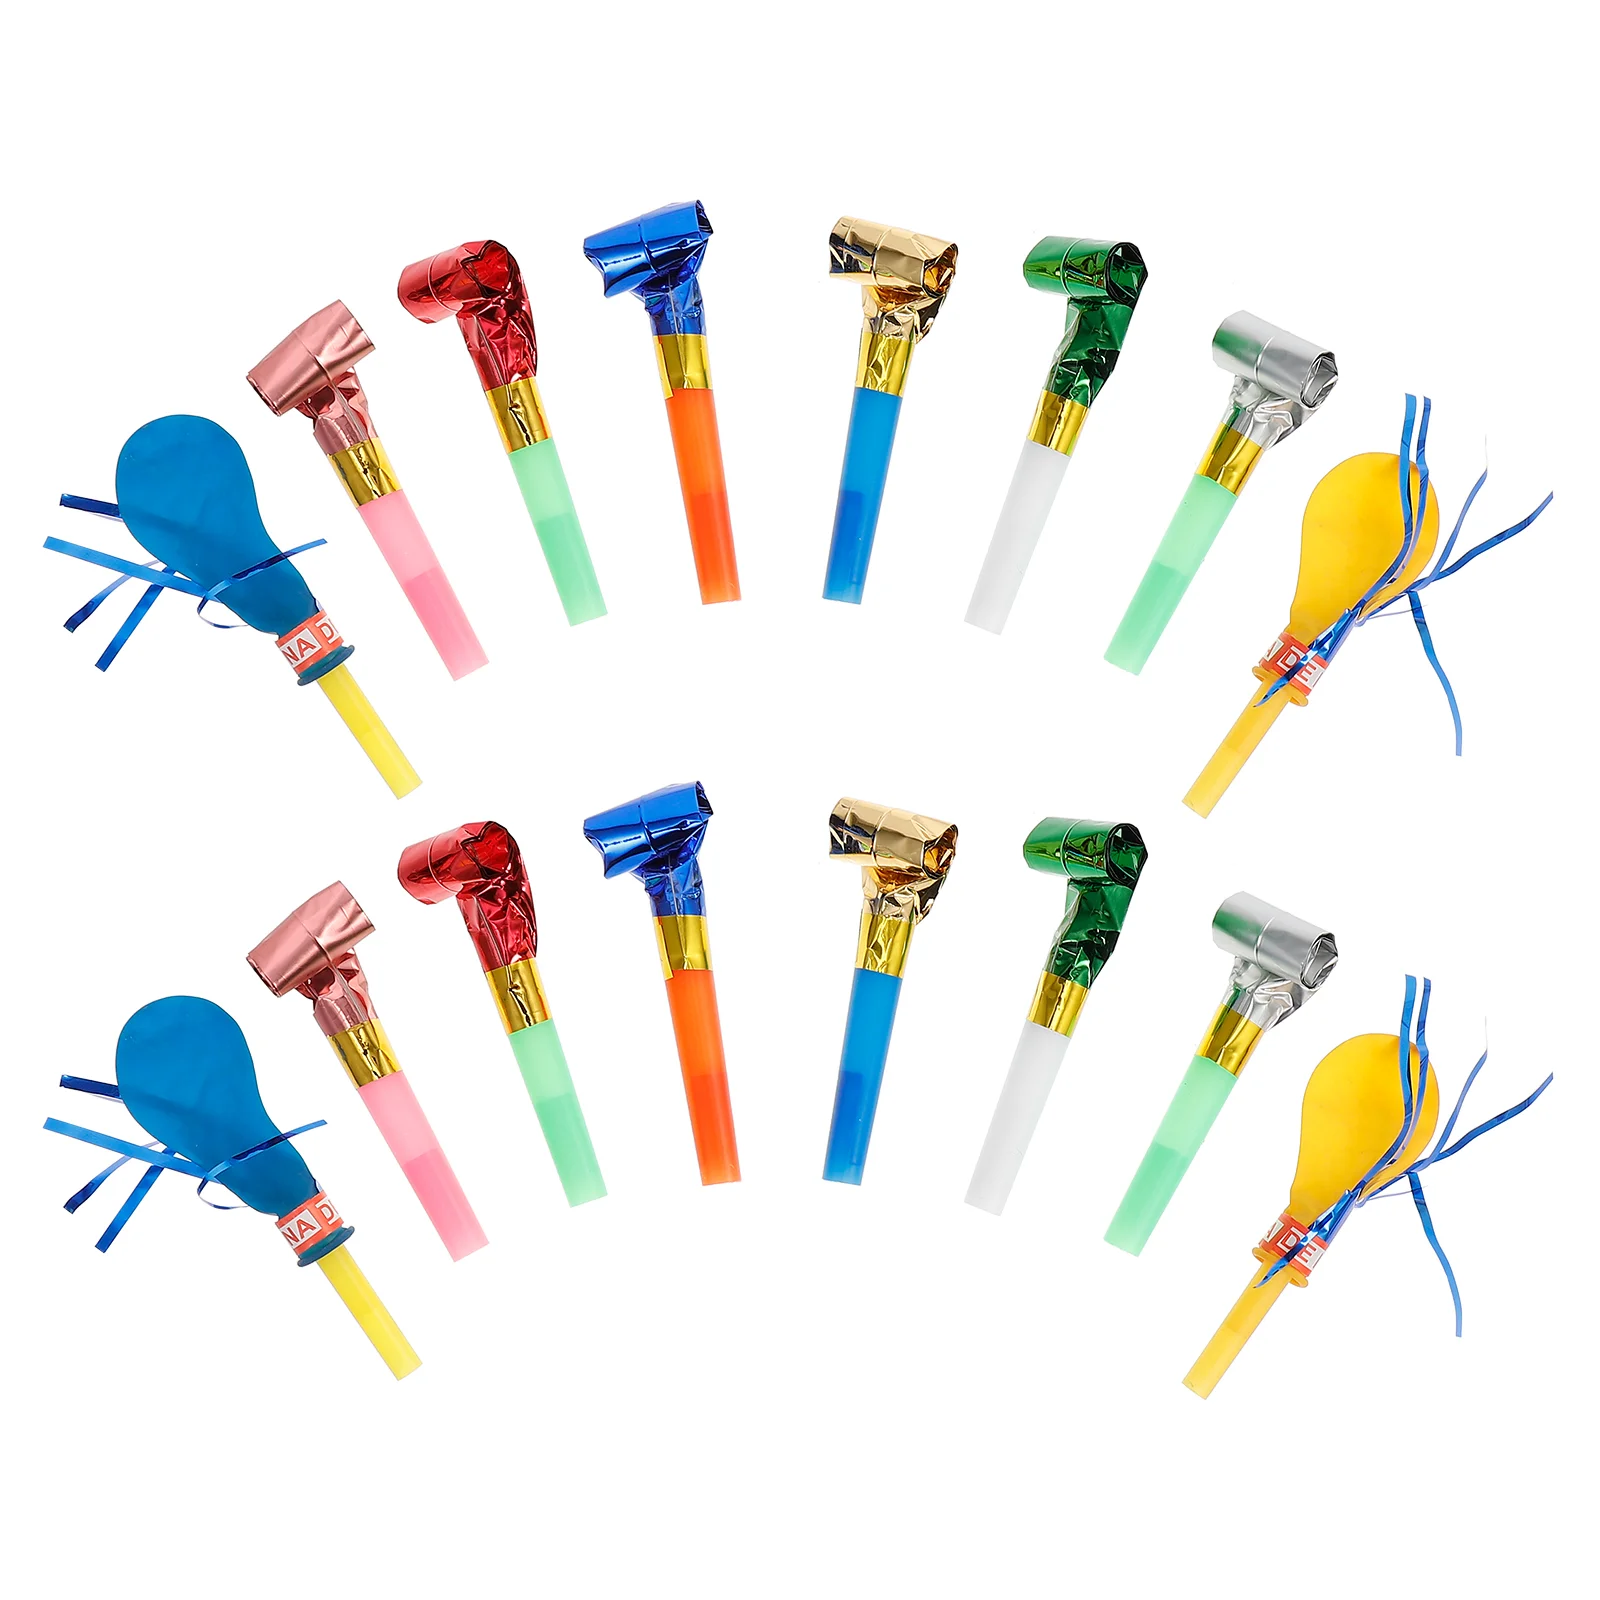 

Party Whistles Whistle Blowouts Toys Horns Noisemakers Birthday Cheering Favors Blow